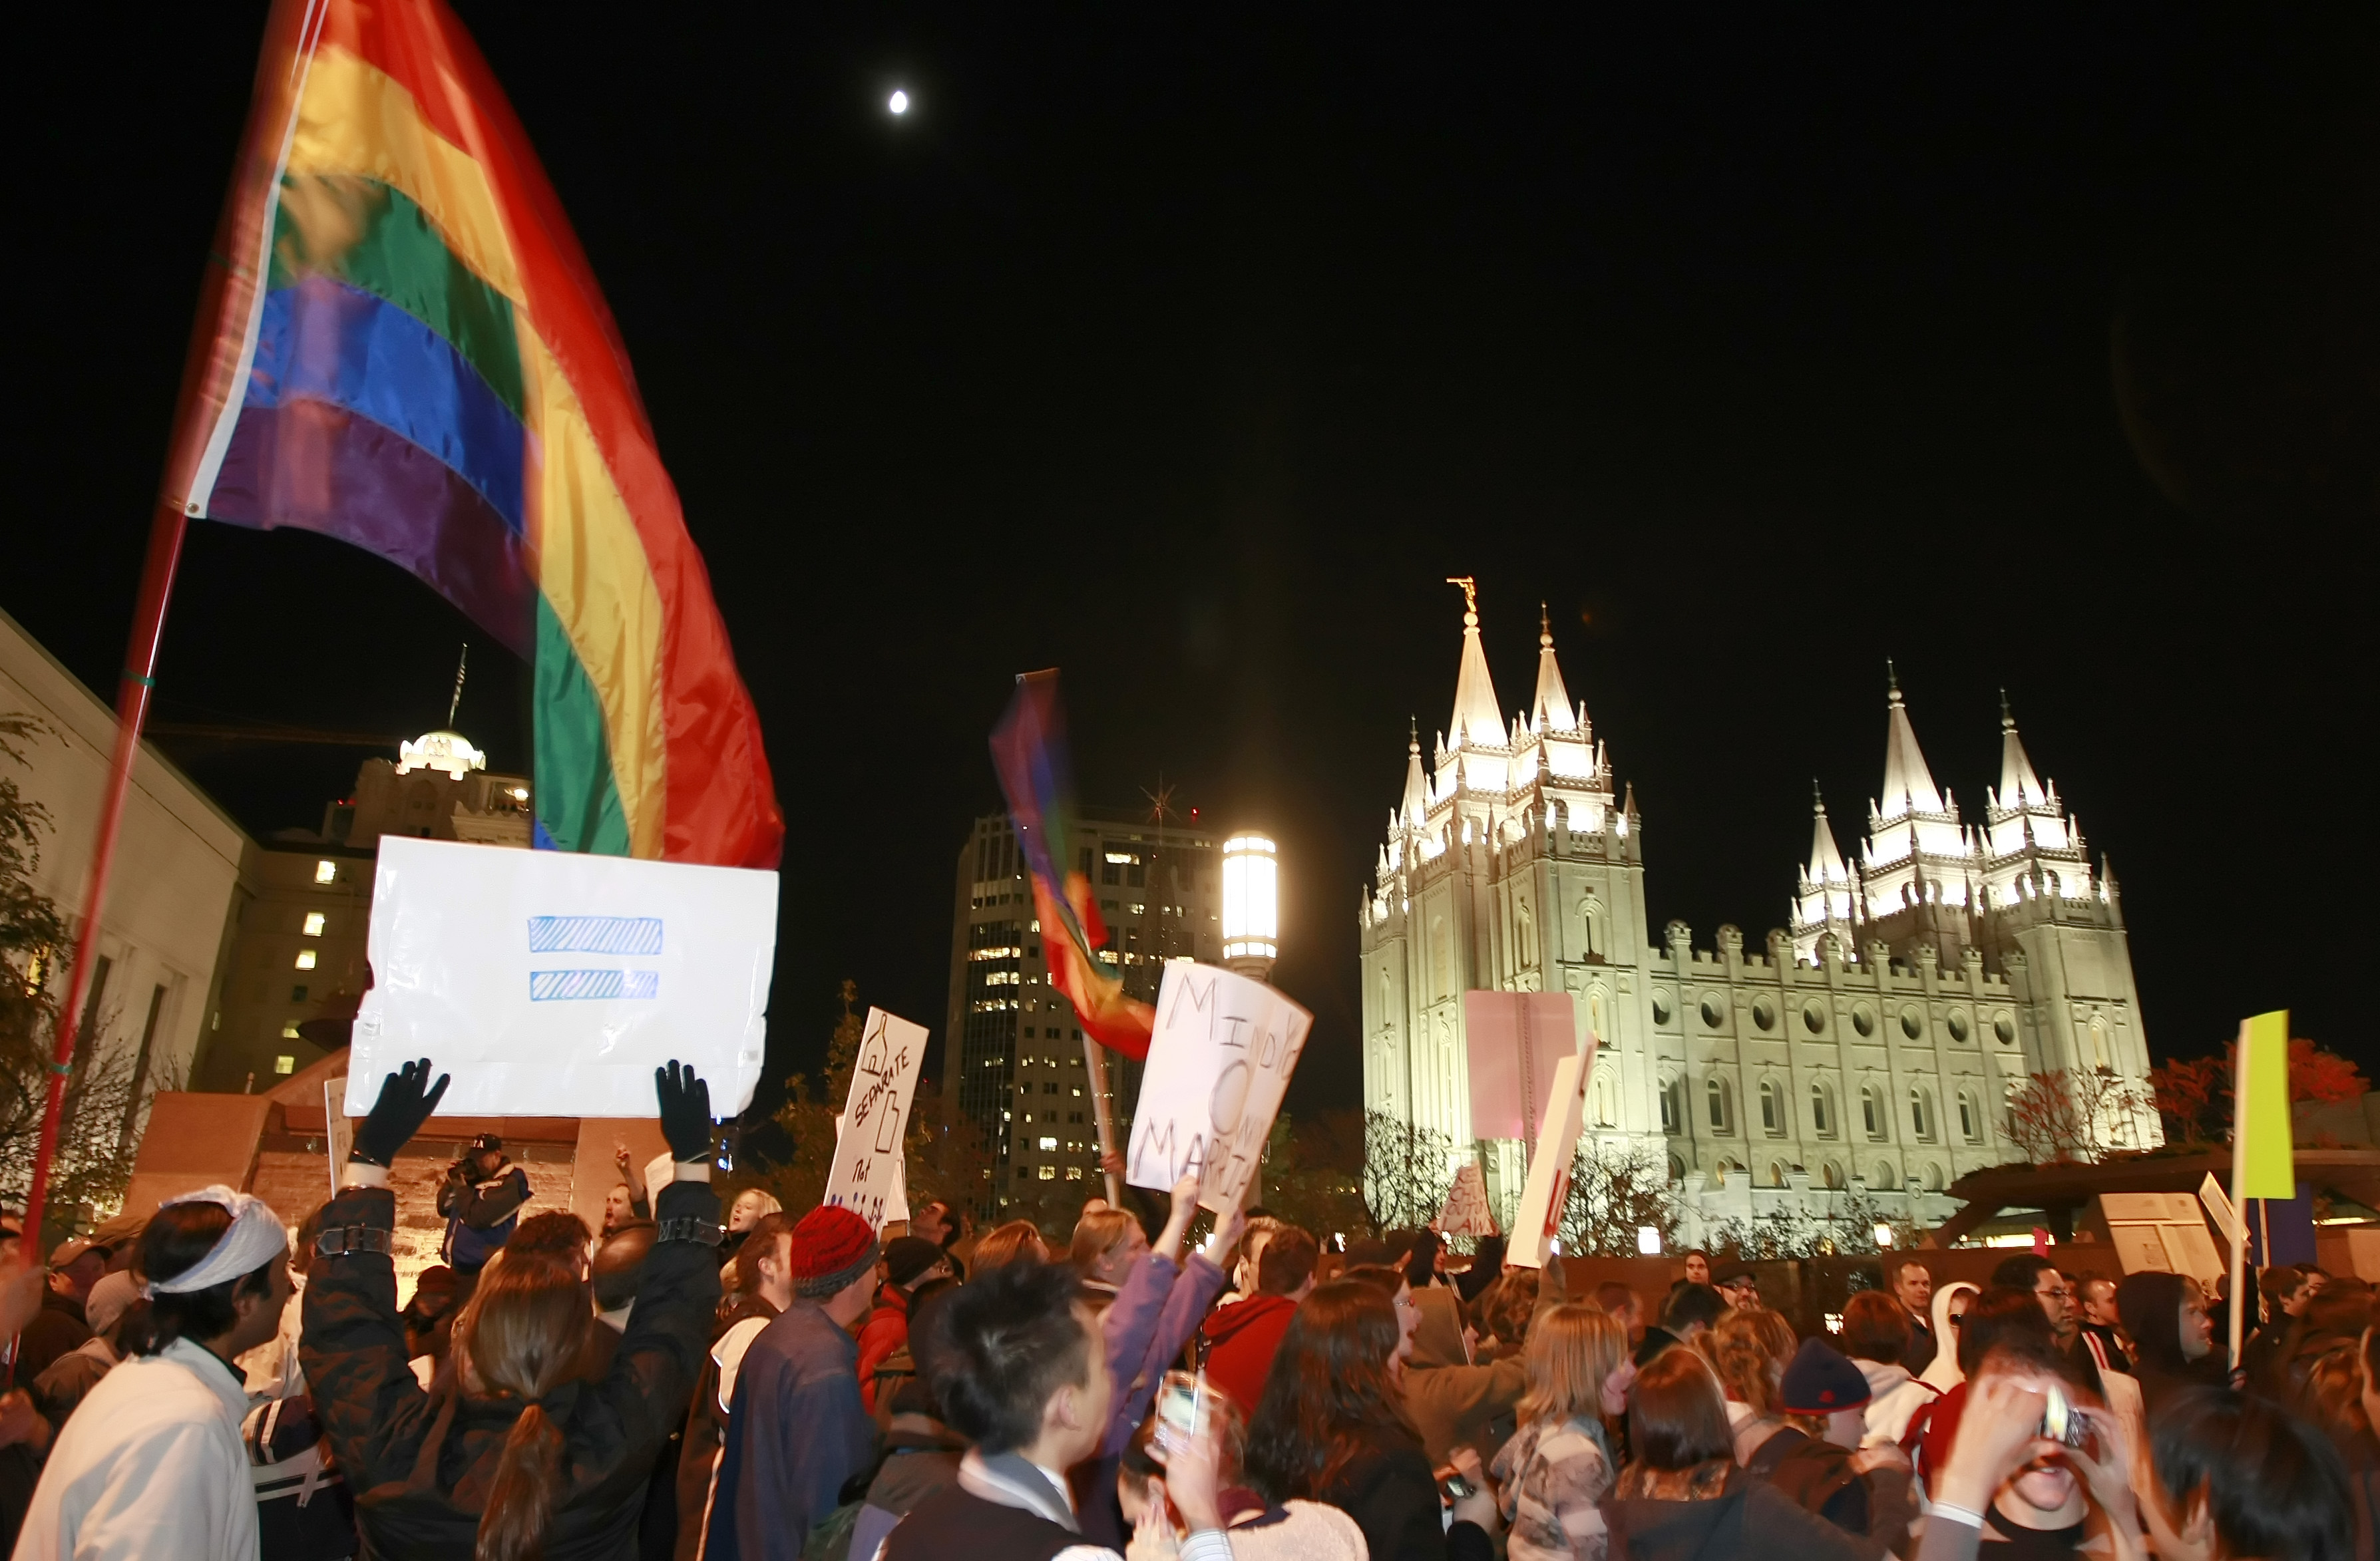 SALT LAKE CITY, UT - NOVEMBER 7: Thousands of people protest against the passage of California's Proposition 8 outside the world headquarters of Temple of the Church of Jesus Christ of Latter Day Saints November 7, 2008 in Salt Lake City, Utah. The protesters were marching against the Mormon church's support for the ballot measure that passed on November 4 making gay marriage illegal. (Photo by George Frey/Getty Images)